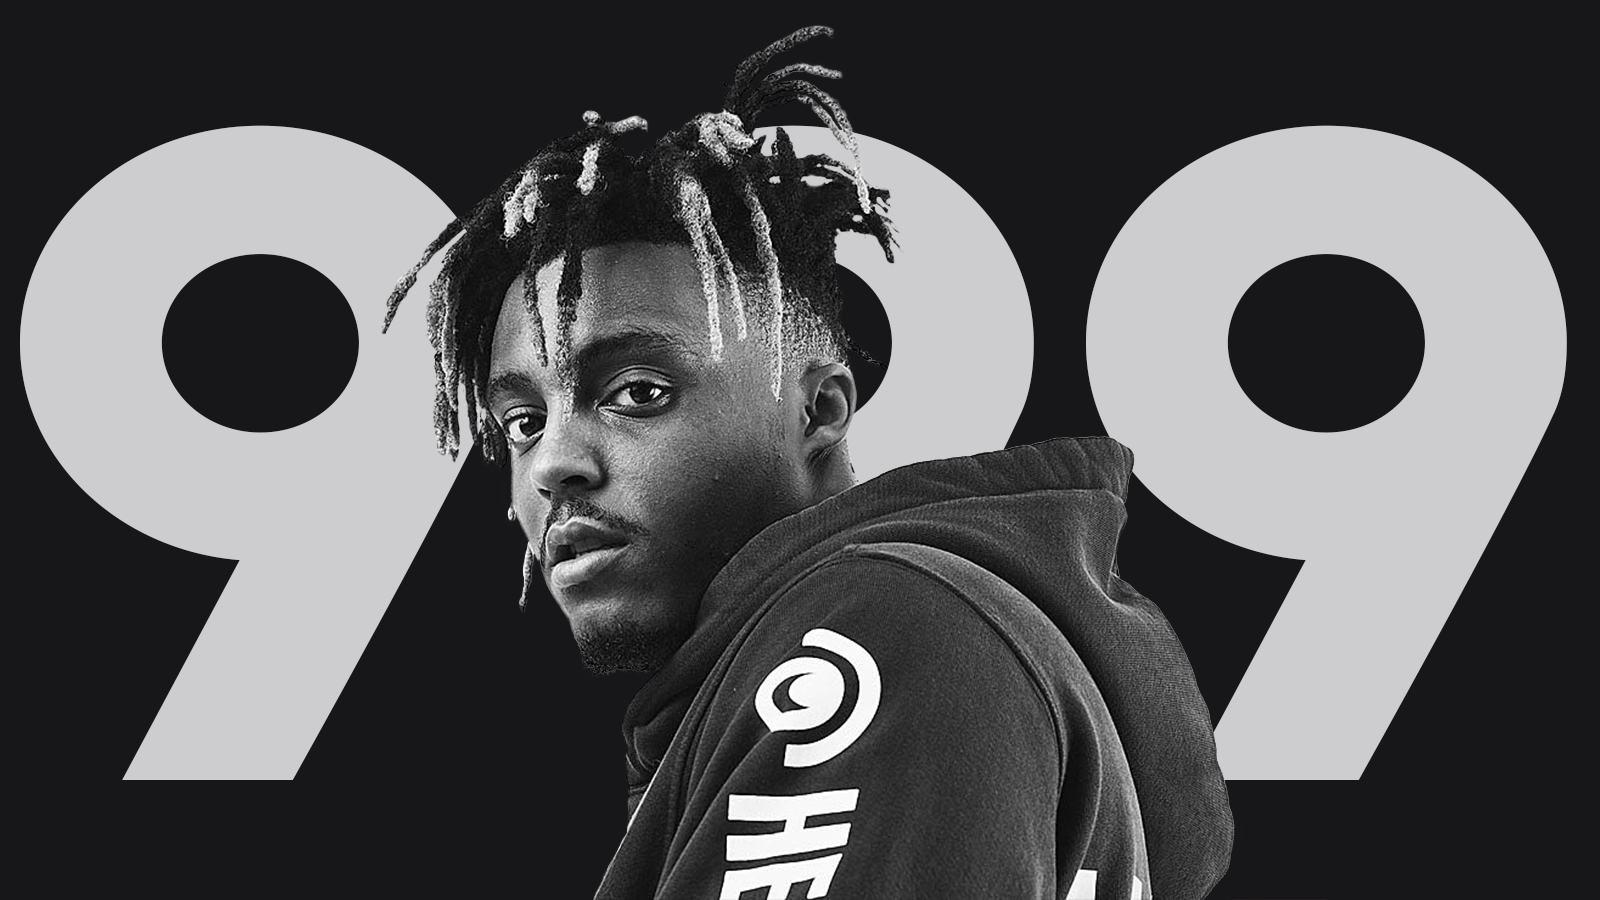 juice wrld 999 behind him... couldn't find a wallpapers so i created i...